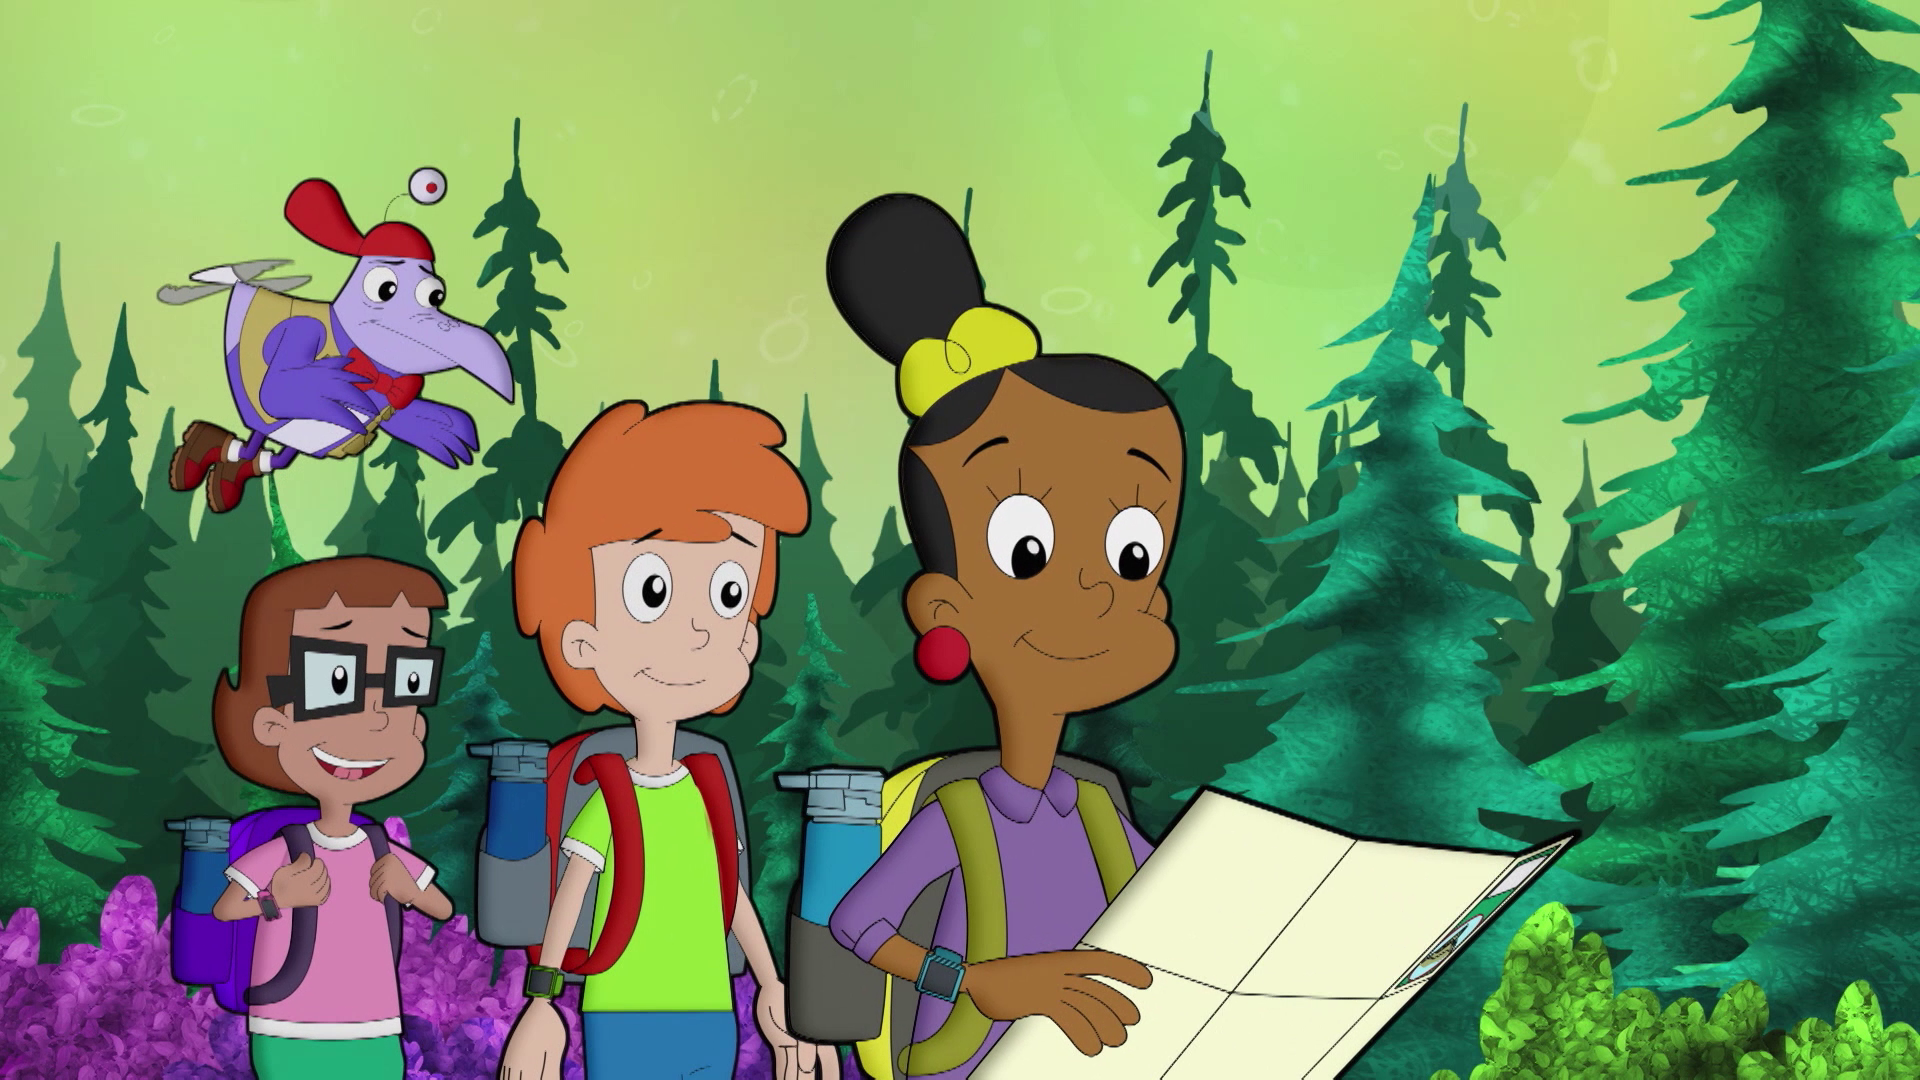 Sign Up for Cyberchase: Mobile Adventures in STEM! — Mountain Lake PBS